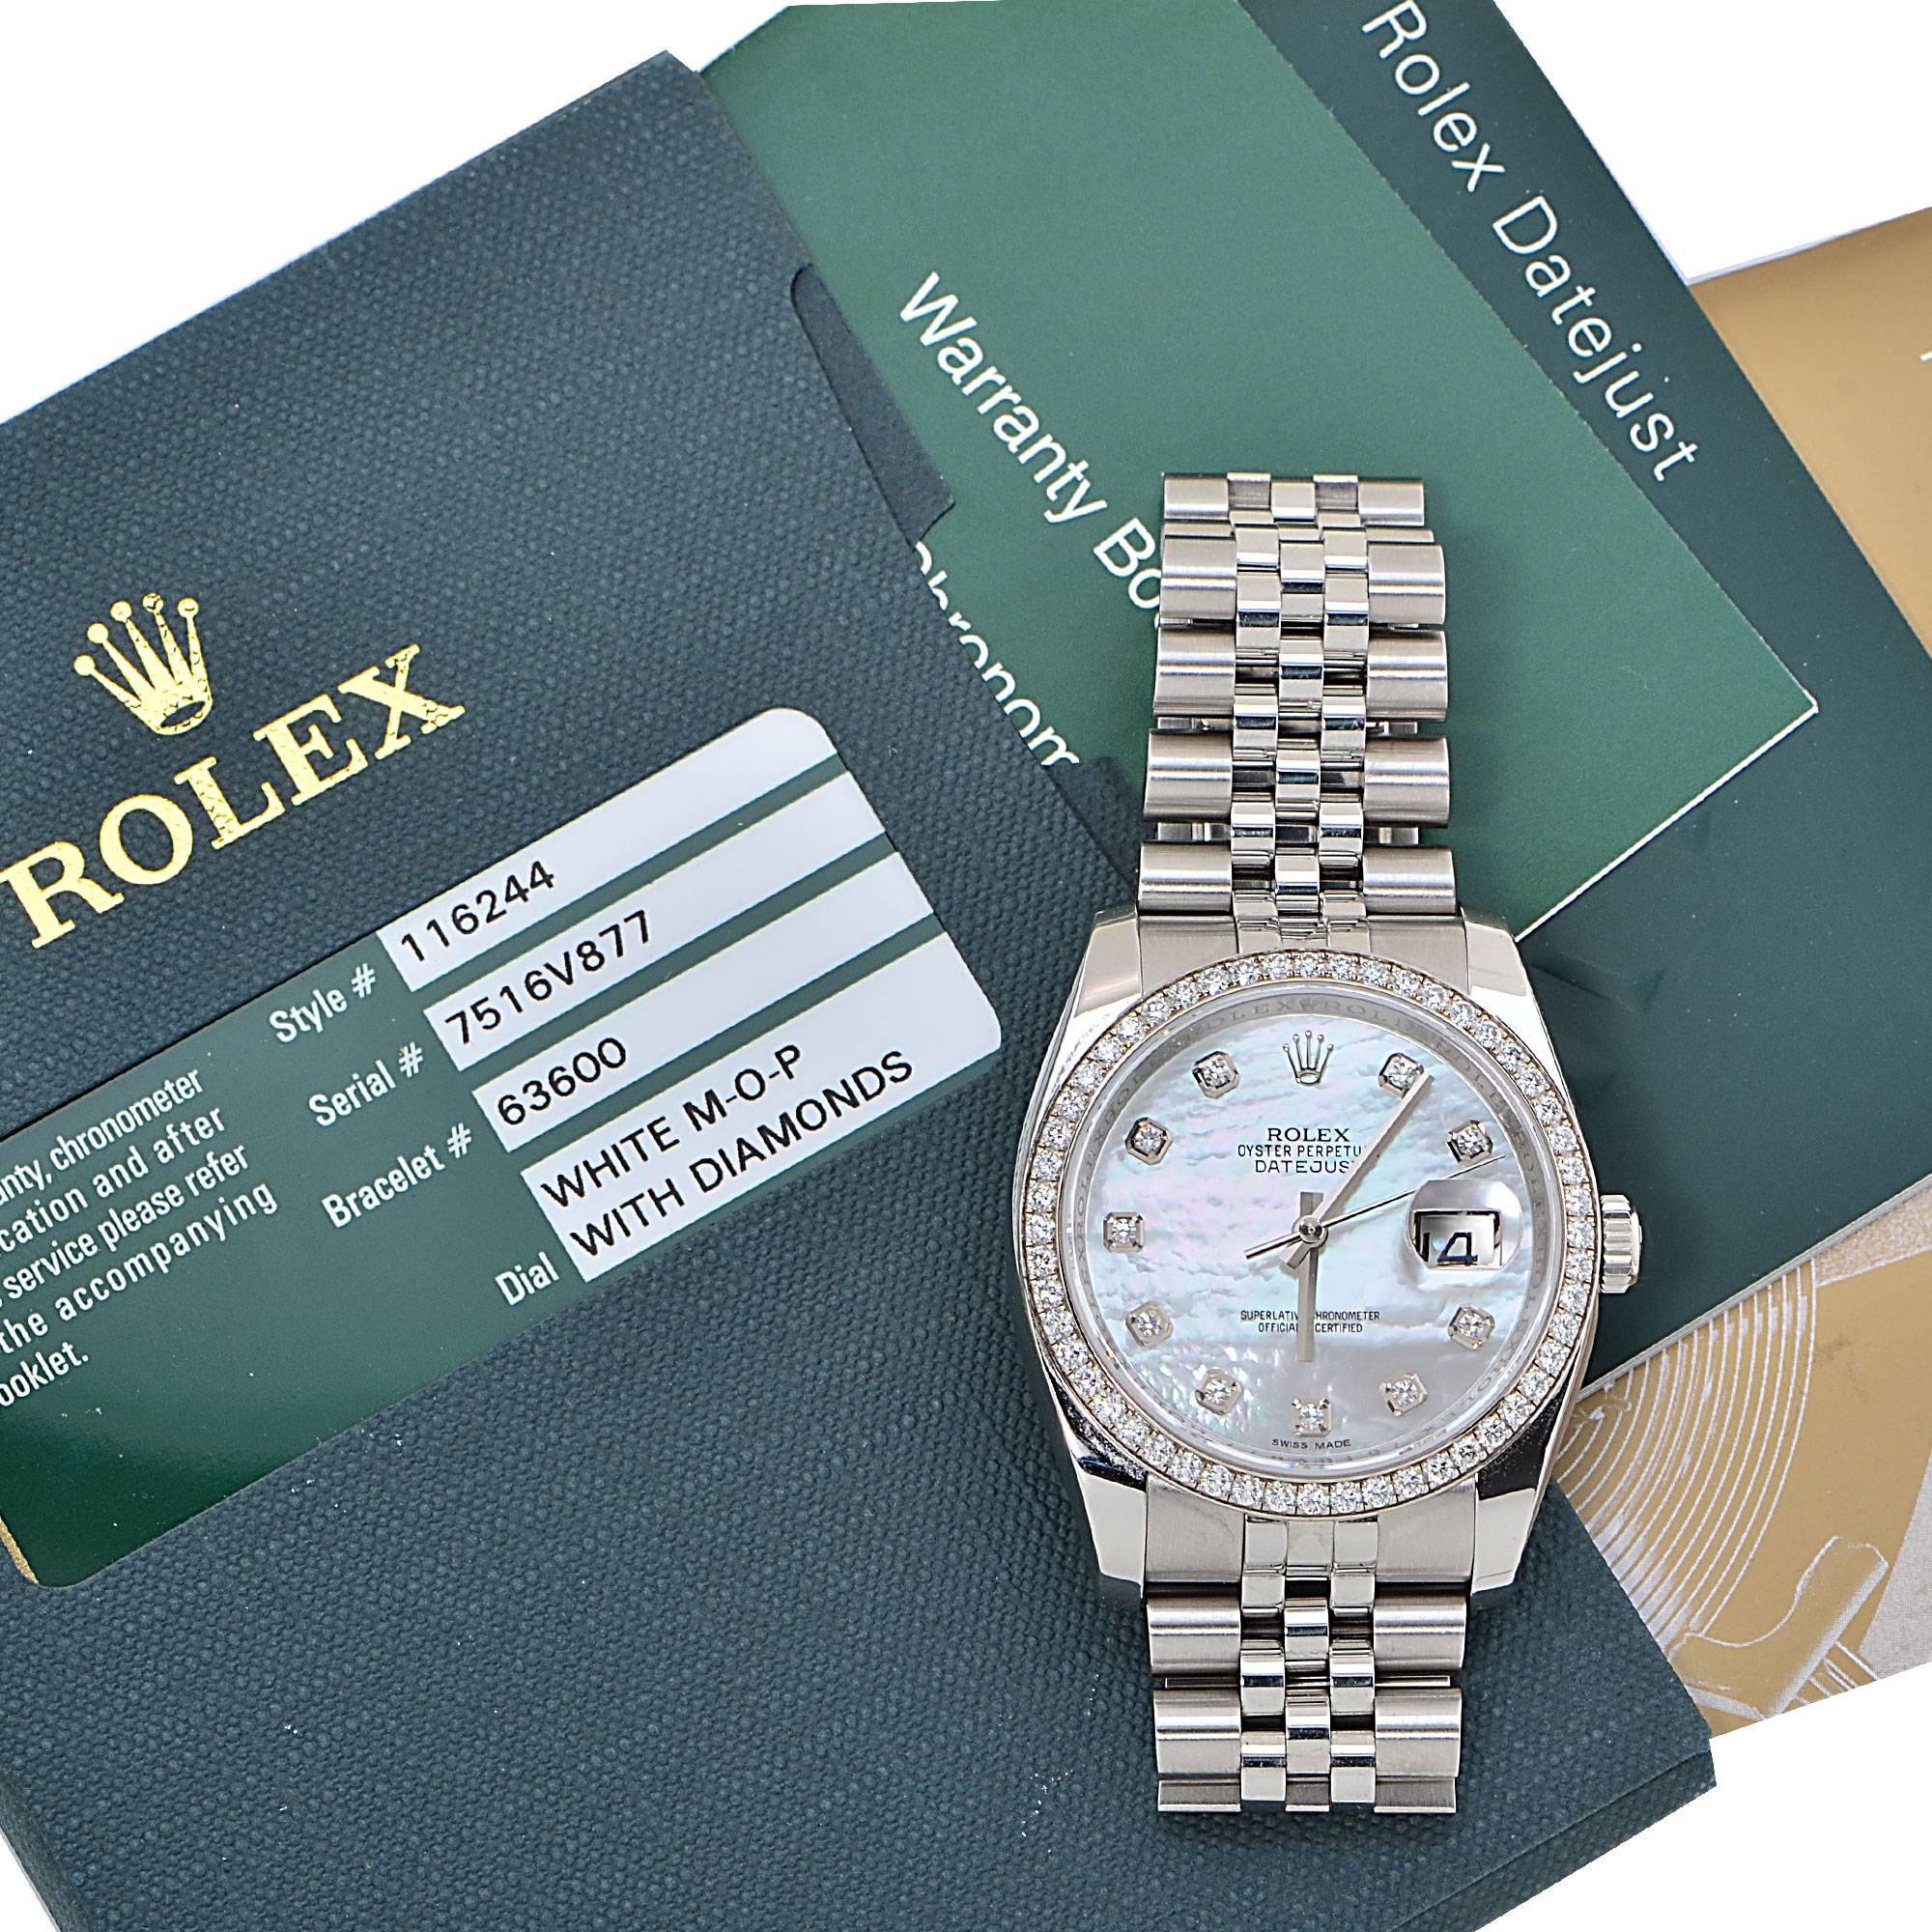 Gold and Stainless Steel Rolex Datejust with Diamond Mother of Pearl Dial and Diamond Bezel with 54 Round Brilliant Cut Diamonds Weighing Approximately 1.35 Carats.

This Rolex Watch is Accompanied by Original Paperwork as well as a Retail